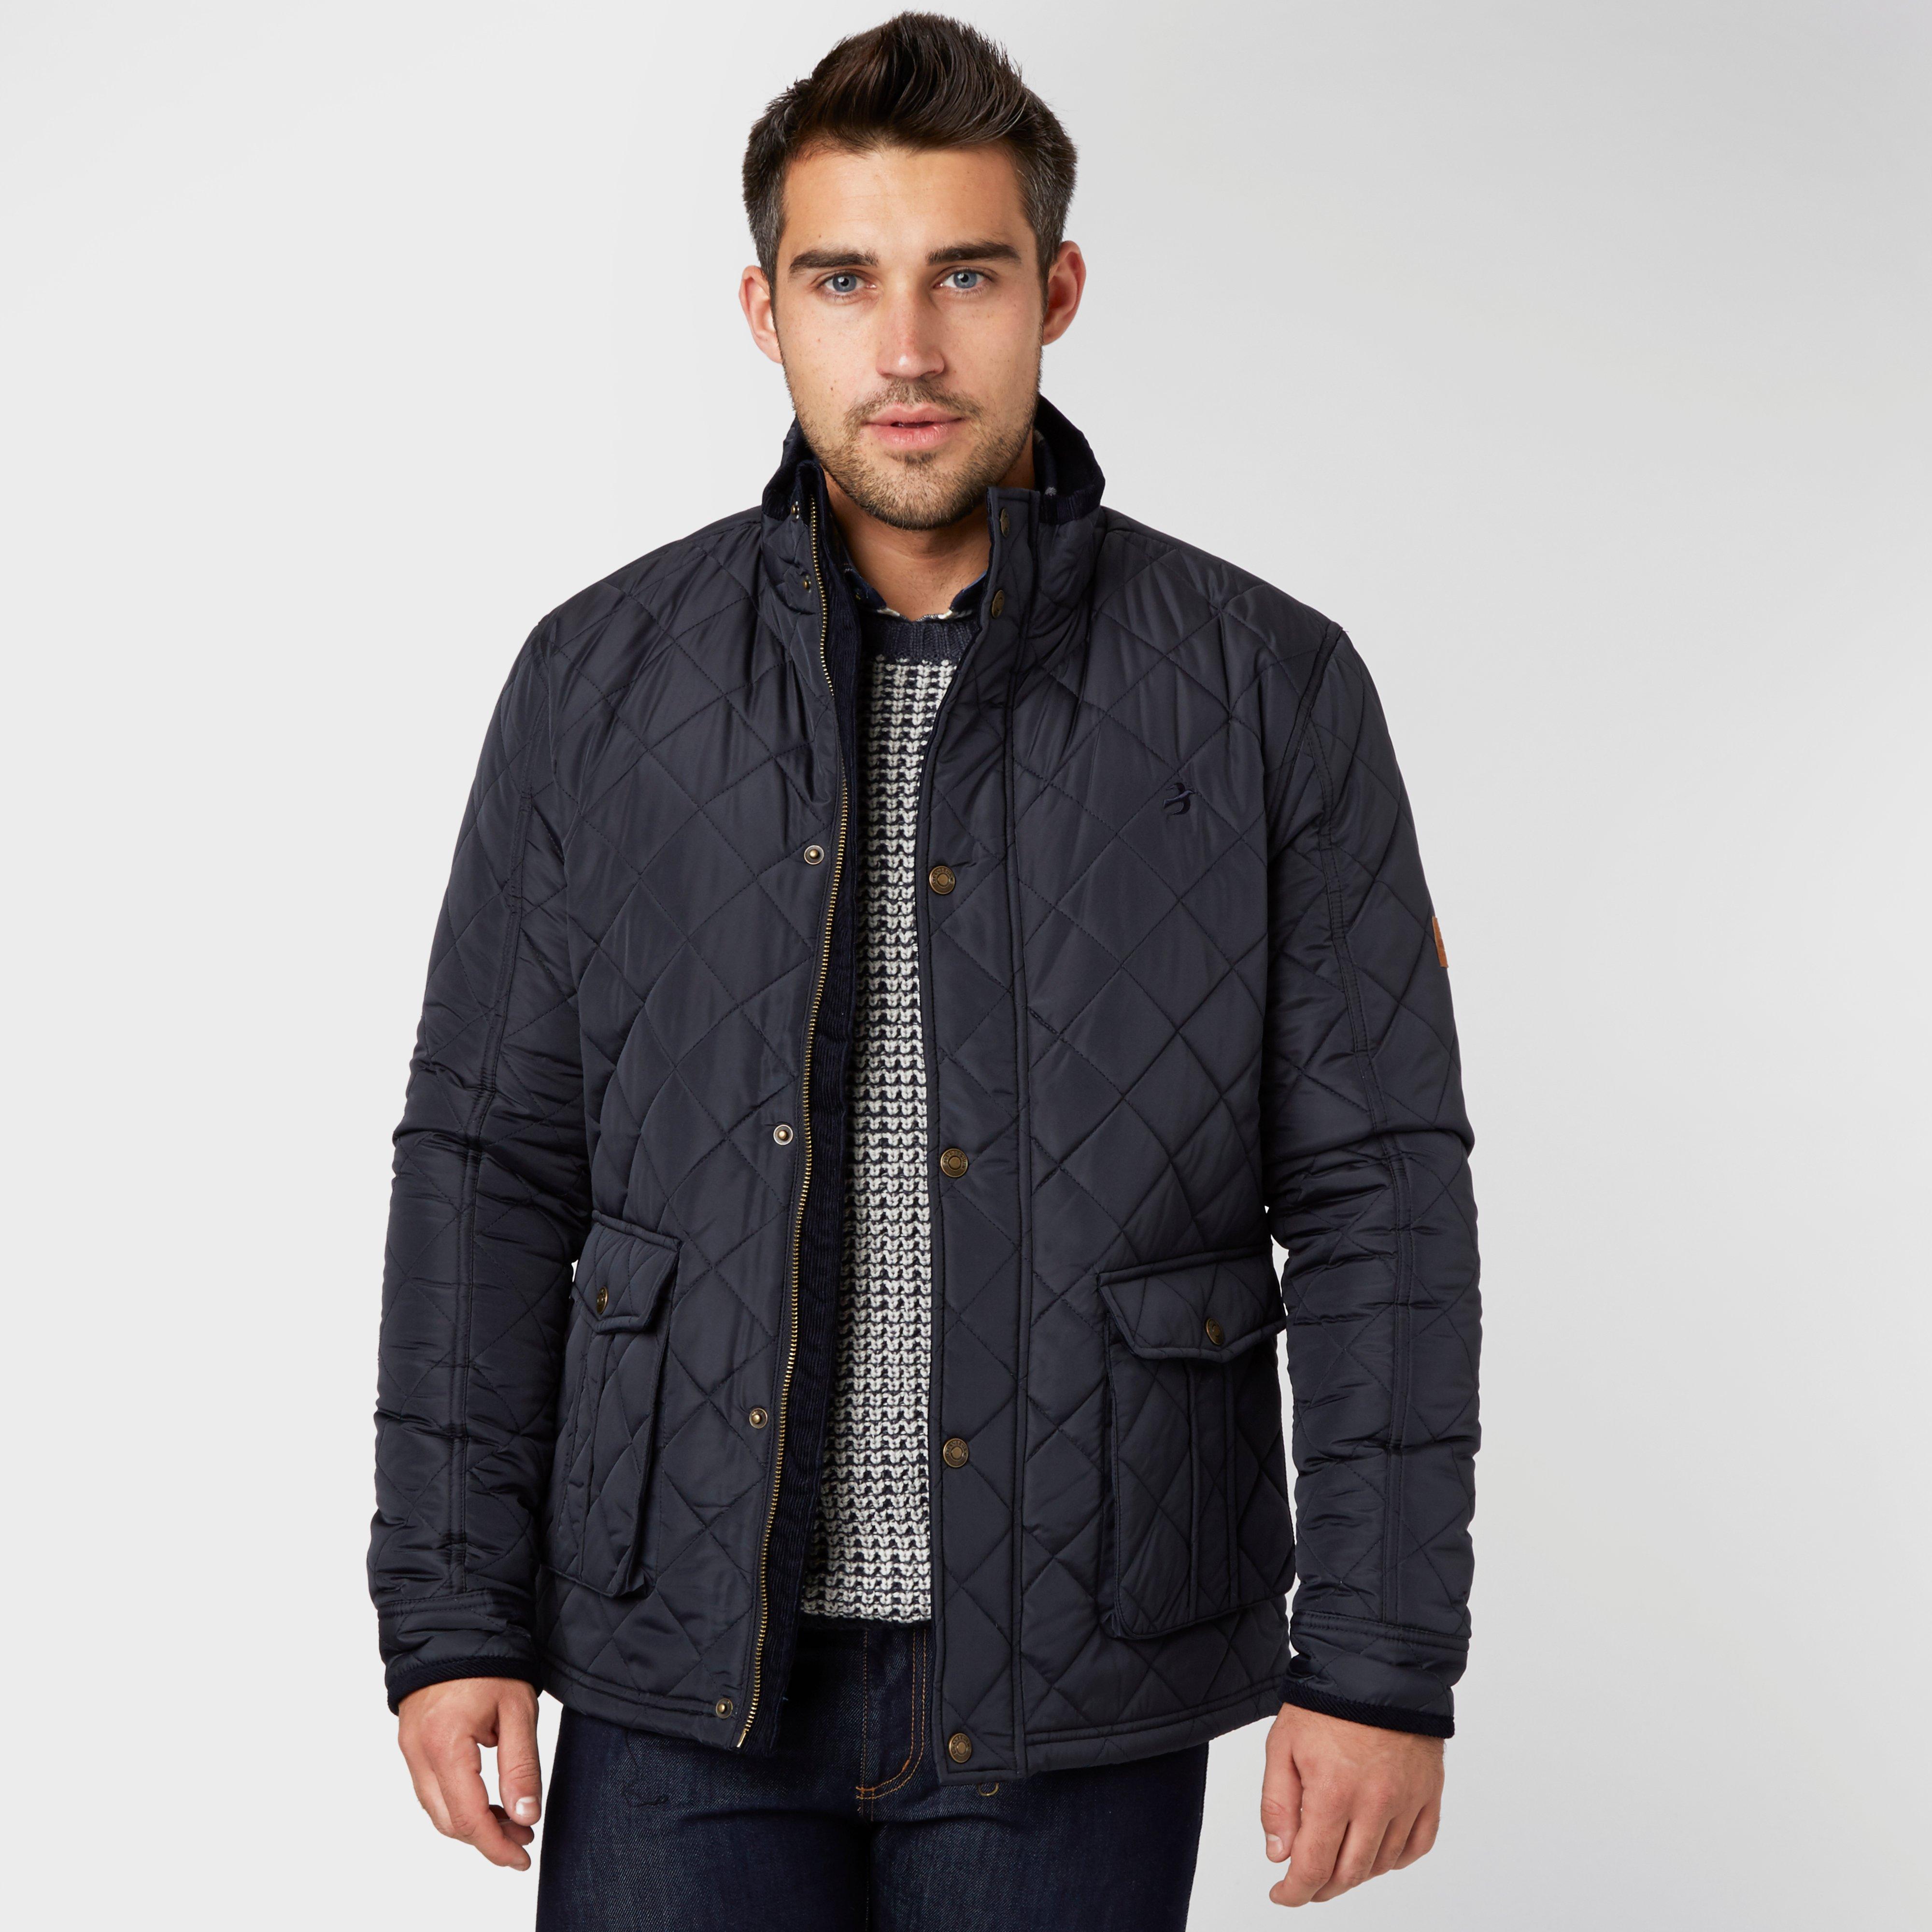 Men's Jacket Stand Collar Diamond Quilted Bomber Coat